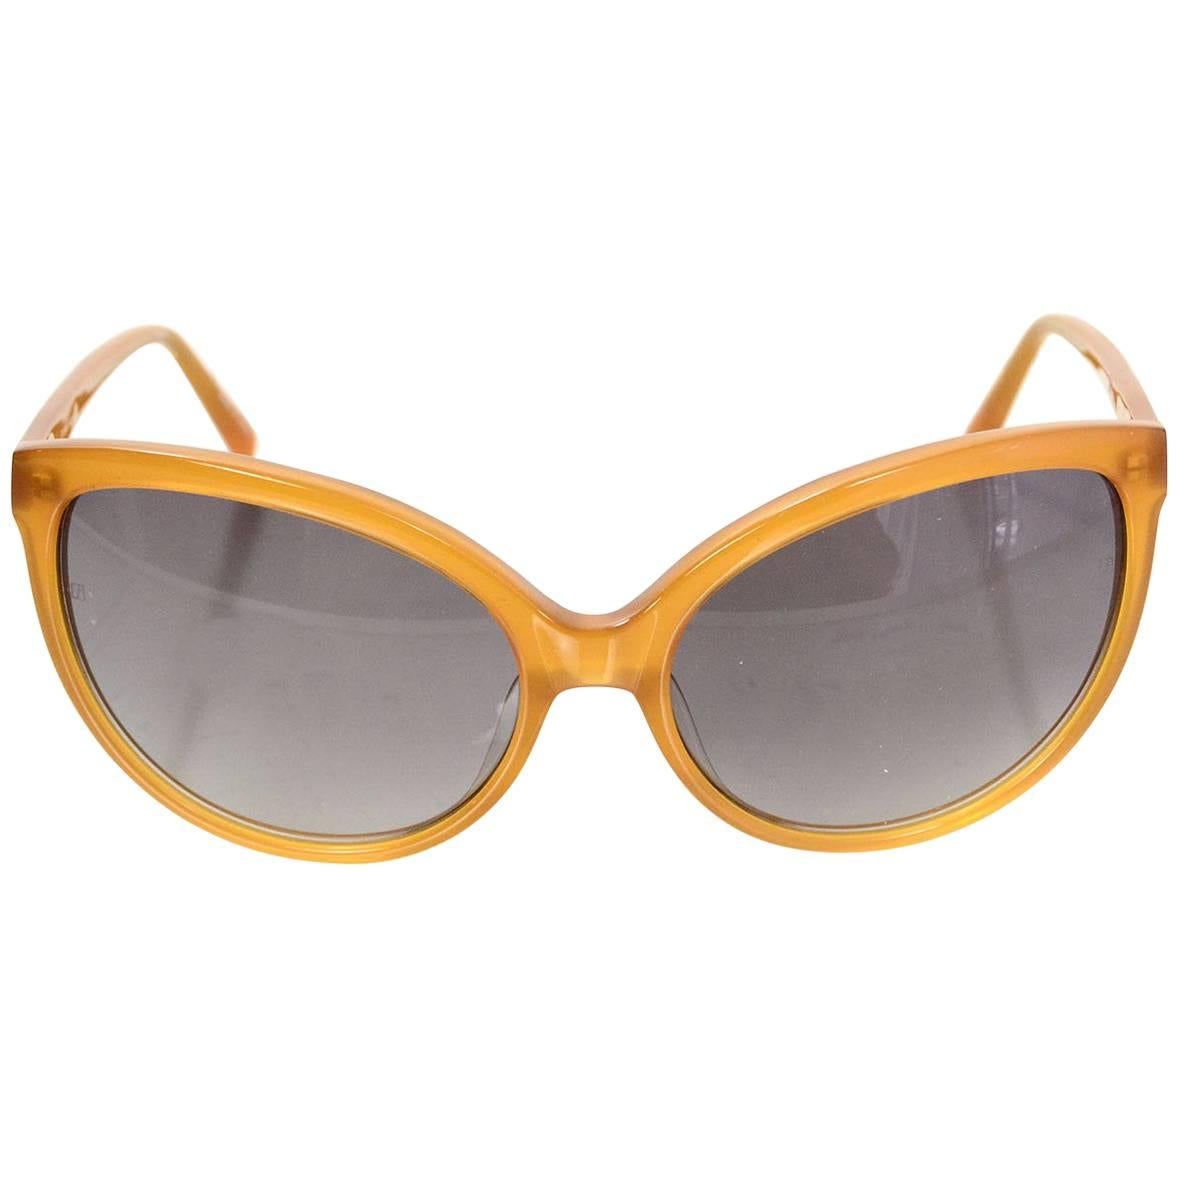 Linda Farrow Rust Cat Eye Sunglasses

Made In: Japan
Color: Rust/Orange
Materials: Resin
Overall Condition: Excellent pre-owned condition, light surface marks
Includes: Linda Farrow case

Measurements:
Length Across: 5.5